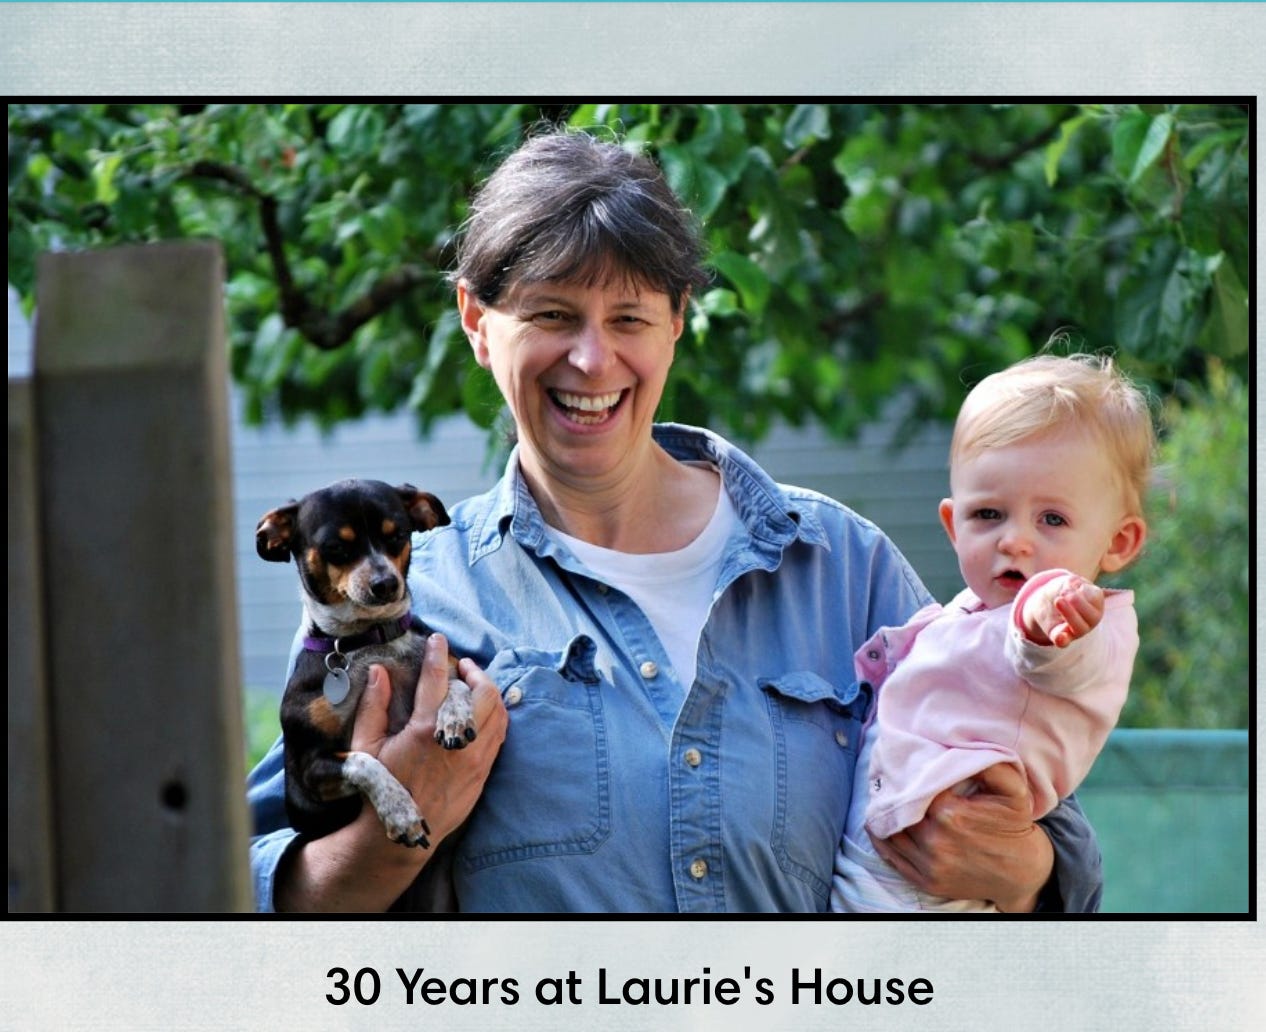 Photo of Laurie carrying our dog Liza in one arm and a toddler in the other. She has a big smile.